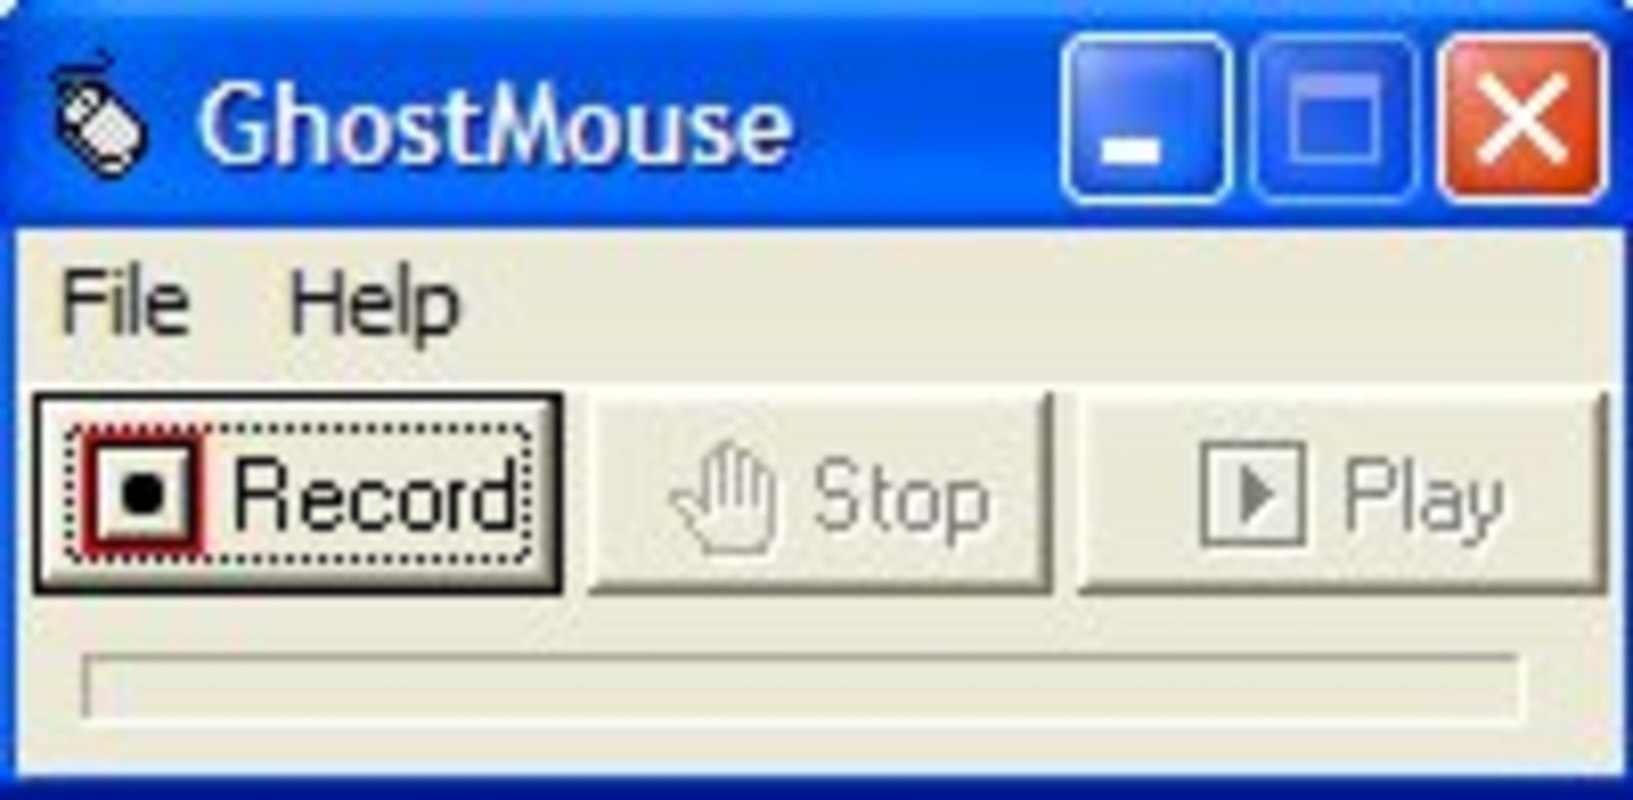 Ghost Mouse 2.0 for Windows Screenshot 2